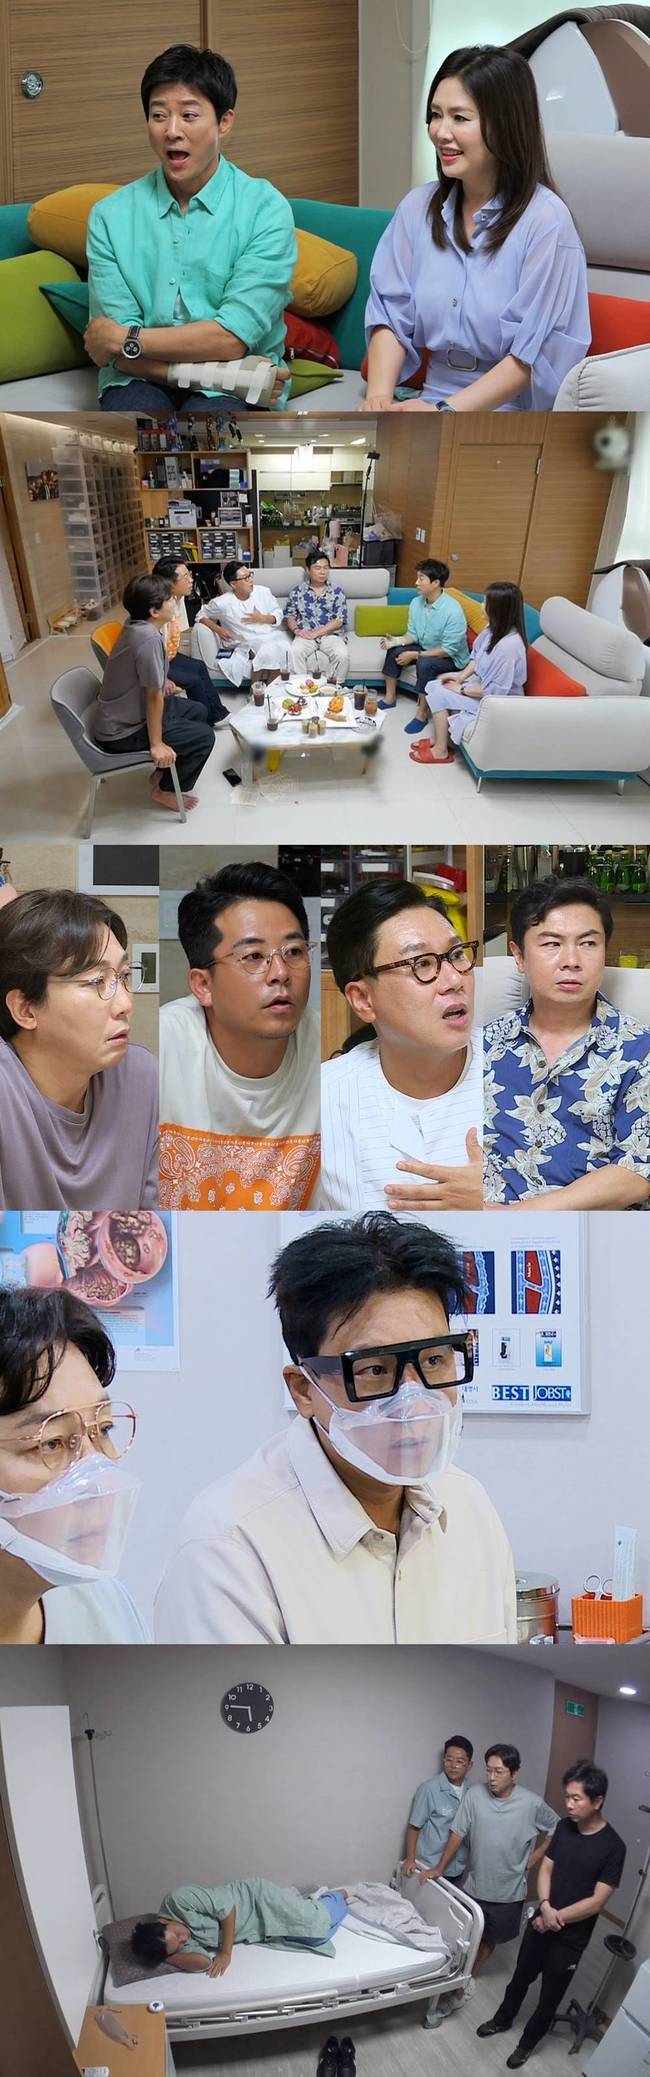 Actors Ha Hee-ra and Choi Soo-jong, who are called the national Mandarin duck couple, reveal the story of the previous Danger in 28 years of marriage.On SBS Take off your shoes and dolsing foreman broadcasted on August 3, lonely stonesing foreman and loving Mandarin duck couple Choi Soo-jong and Ha Hee-ra appear and give a laugh.Dolsing Forman, who exploded jealously in the appearance of two Al-Kon-Dak-Kong, started to catch up with the troubles and laughed, saying, Have you ever really fought?However, her lover husband Choi Soo-jong showed off her national affection by opening the love science theory without being embarrassed by the jealous attack of Dolsing Forman.But after a while, Ha Hee-ra revealed to Dolsing Forman, who was struggling to find a gap between the lover couple, that he was hiding his mind, saying, I am replacing the words I have not been able to say. Choi Soo-jong was greatly embarrassed and made everyone laugh.Ha Hee-ra has shocked everyone by releasing an anecdote that wrote each room for the first time since marriage.Since then, Dolsing Forman has been discussing with the Mandarin duck couple in the 28th year about why they are divided by generation.In this process, an unexpected man who is subject to a duty of all ages is revealed and surprised everyone.The appearance of Dolsing Forman, who visited the hospital for Lee Sang-min, who suddenly underwent surgery, is also revealed.The Dolling brothers, who saw Lee Sang-mins condition, looked after him with a worried expression and acted as a guardian and kept his dolsing.The Dolling brothers were surprised by the screams of the one-word screams from the operating room, and what happened to Lee Sang-min is revealed on this broadcast.